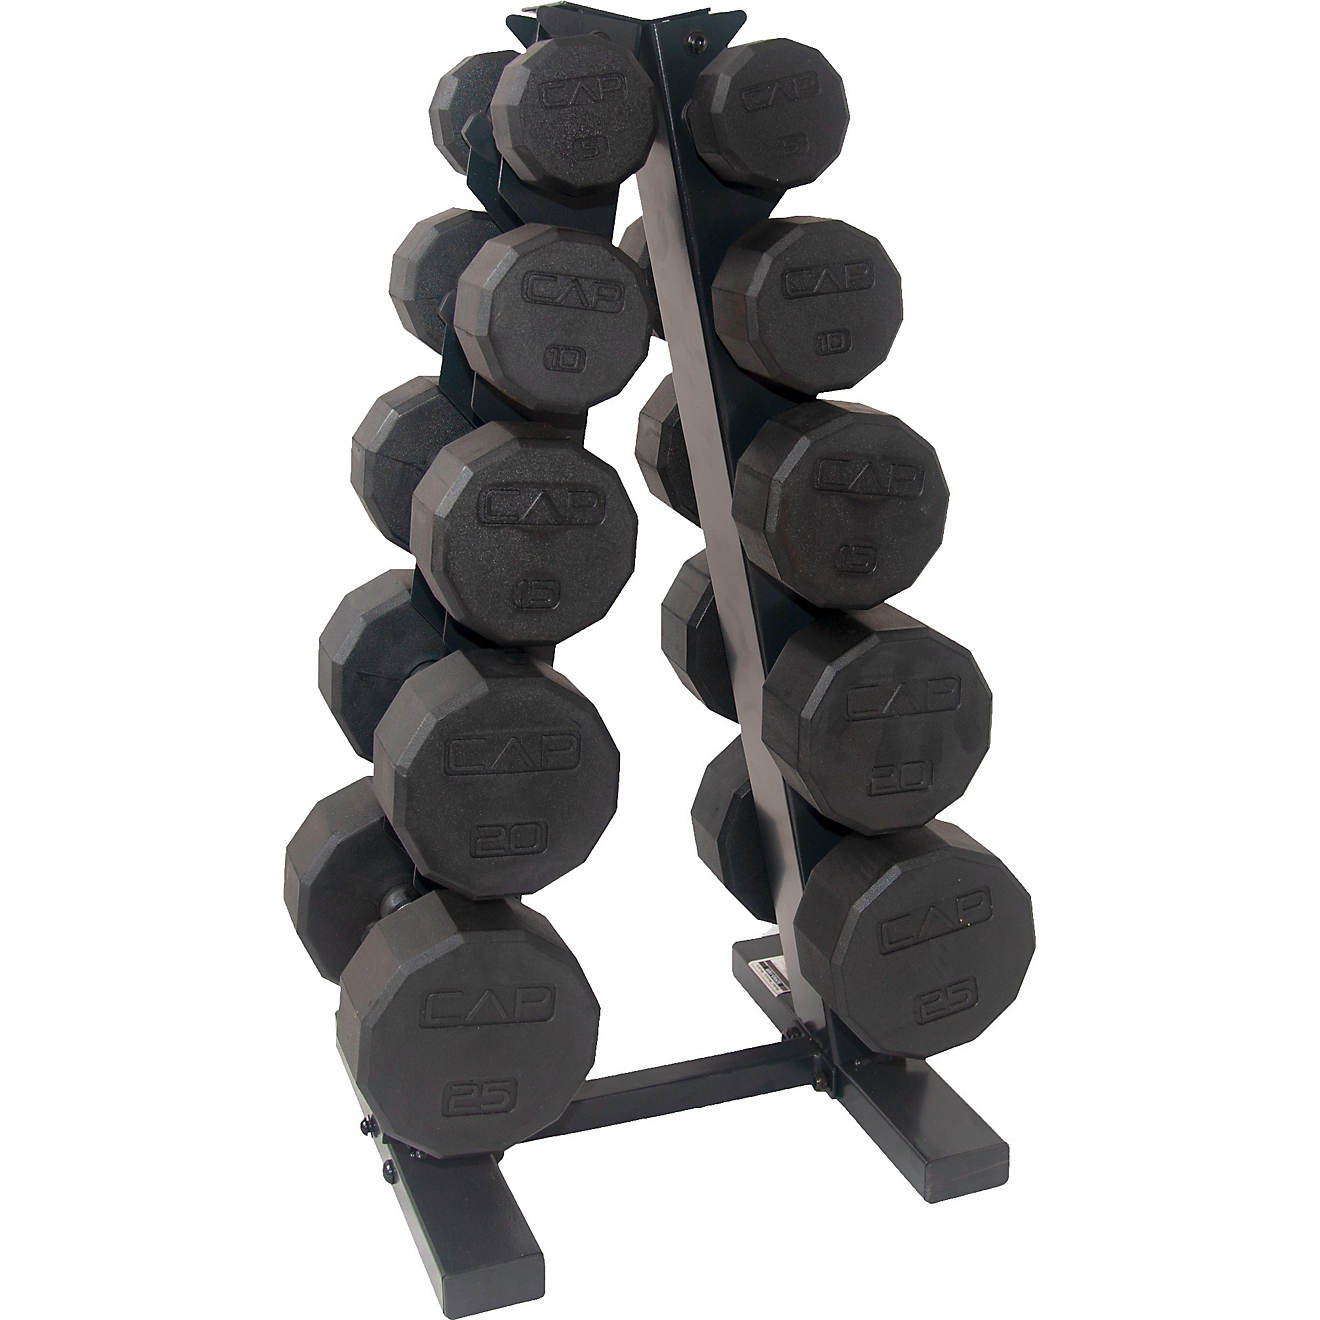 CAP 12-sided Coated Dumbbell Set with Storage Rack                                                                               - view number 1